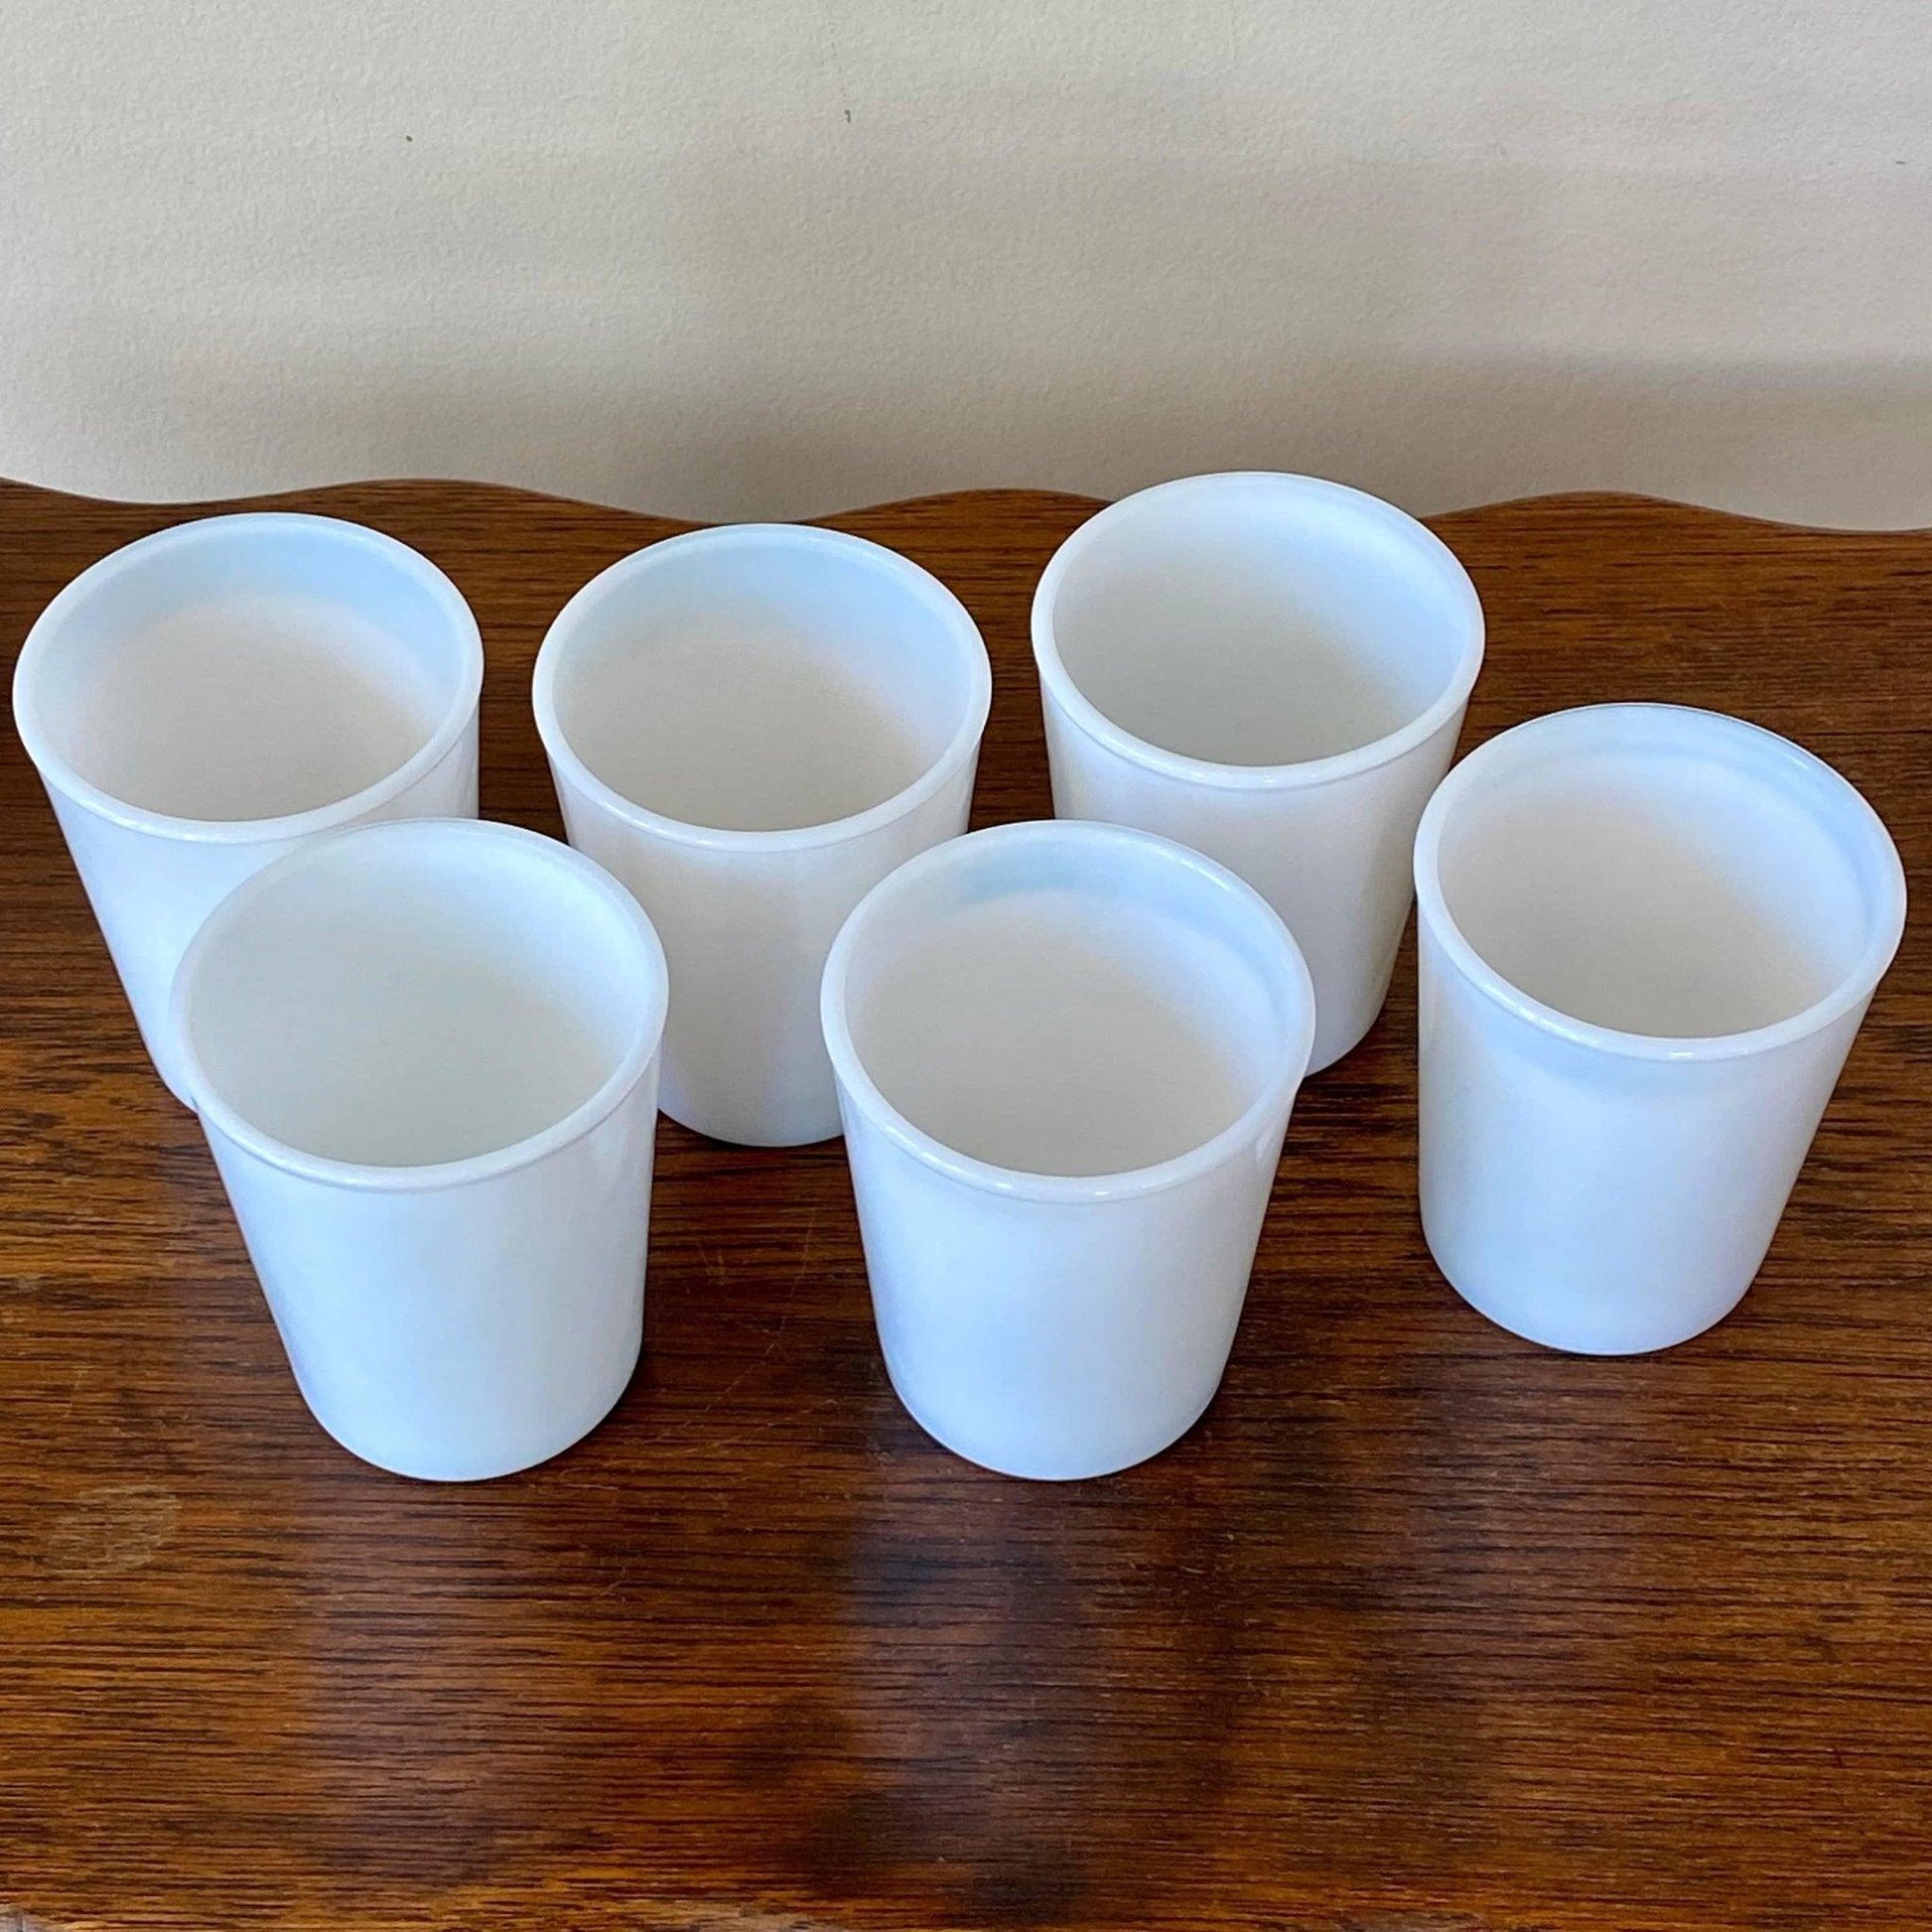 Opalescent-white Milk Glass Tumblers - Vintage